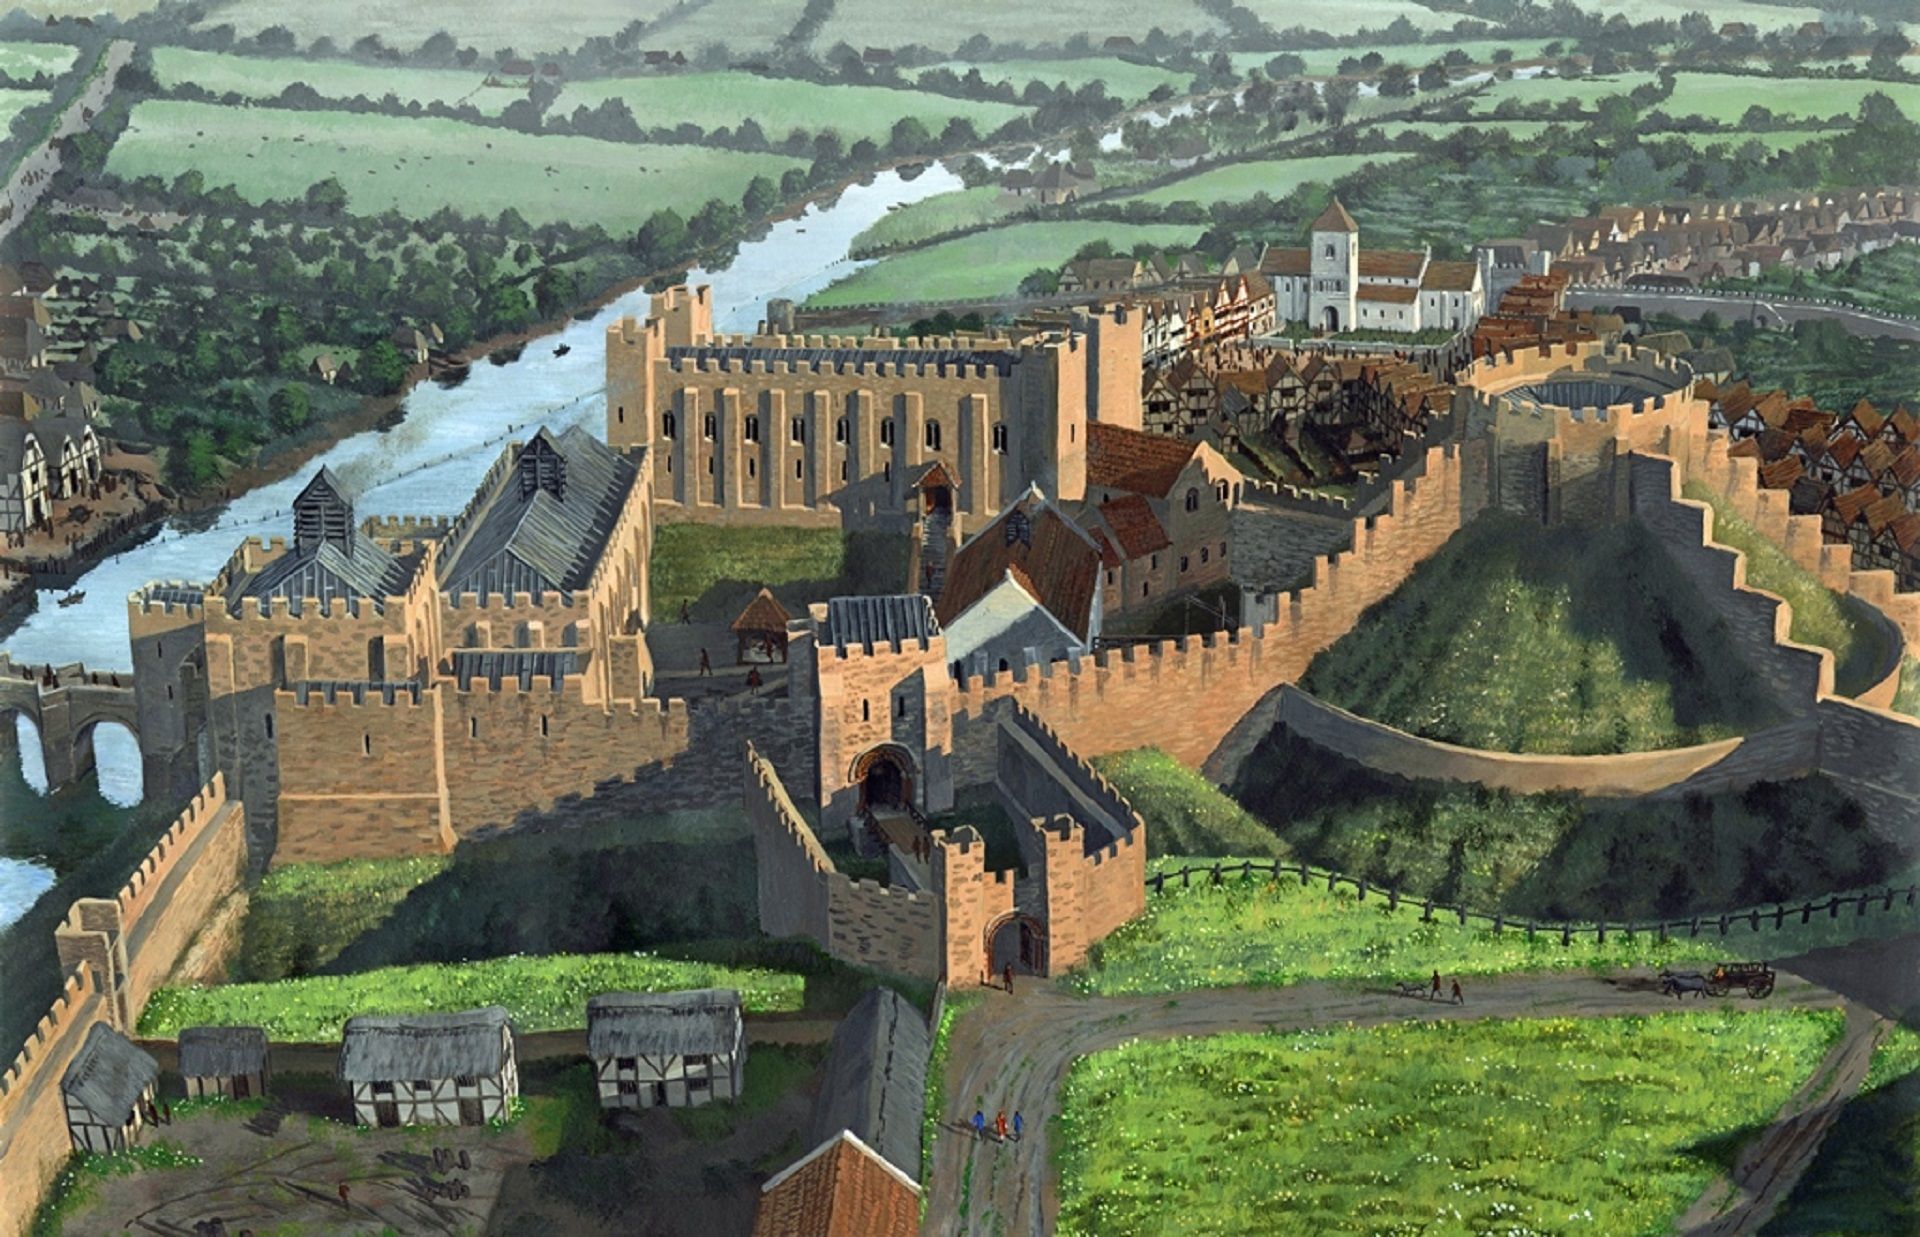 A 12th century reconstruction drawing by Dominic Andrews. The reconstruction drawing features the North Hall, Keep, Gatehouse and Norman Chapel.